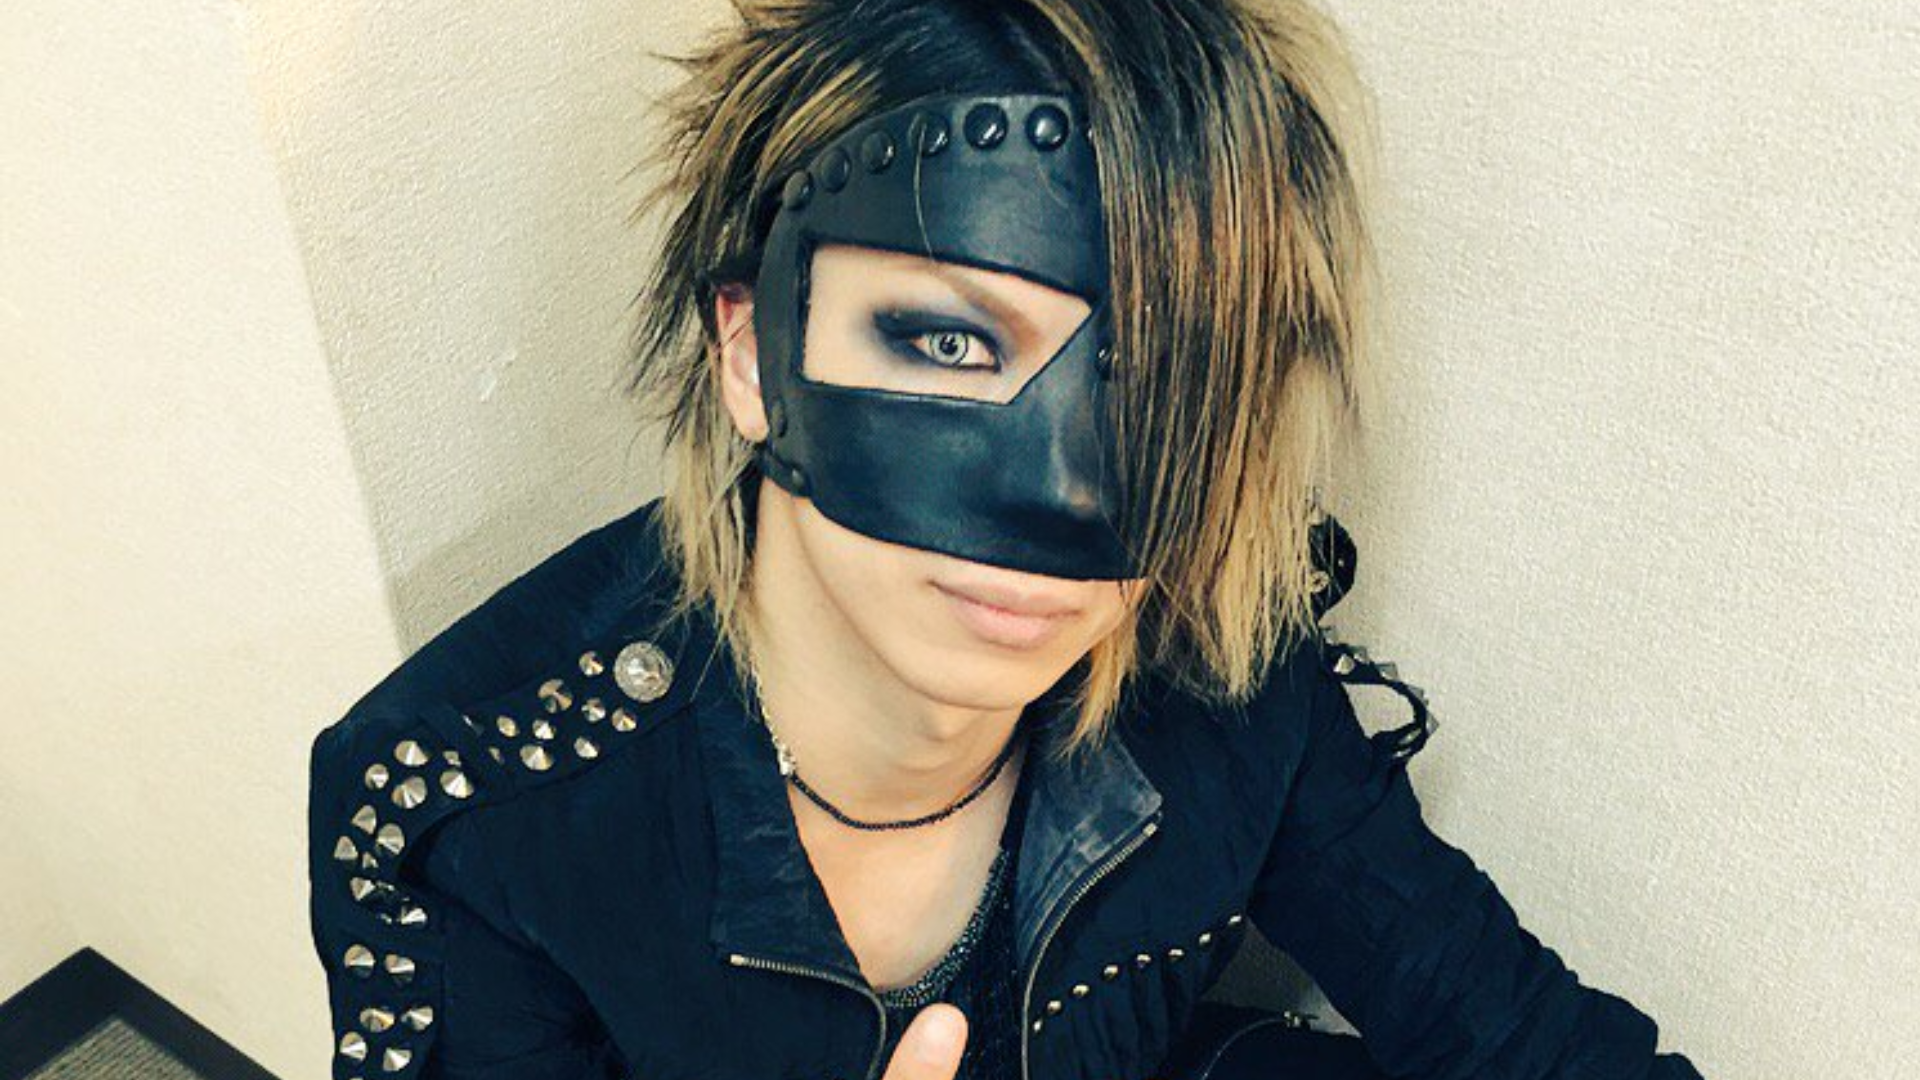 Reita from Japanese rock band 'The Gazette' dies at age 42